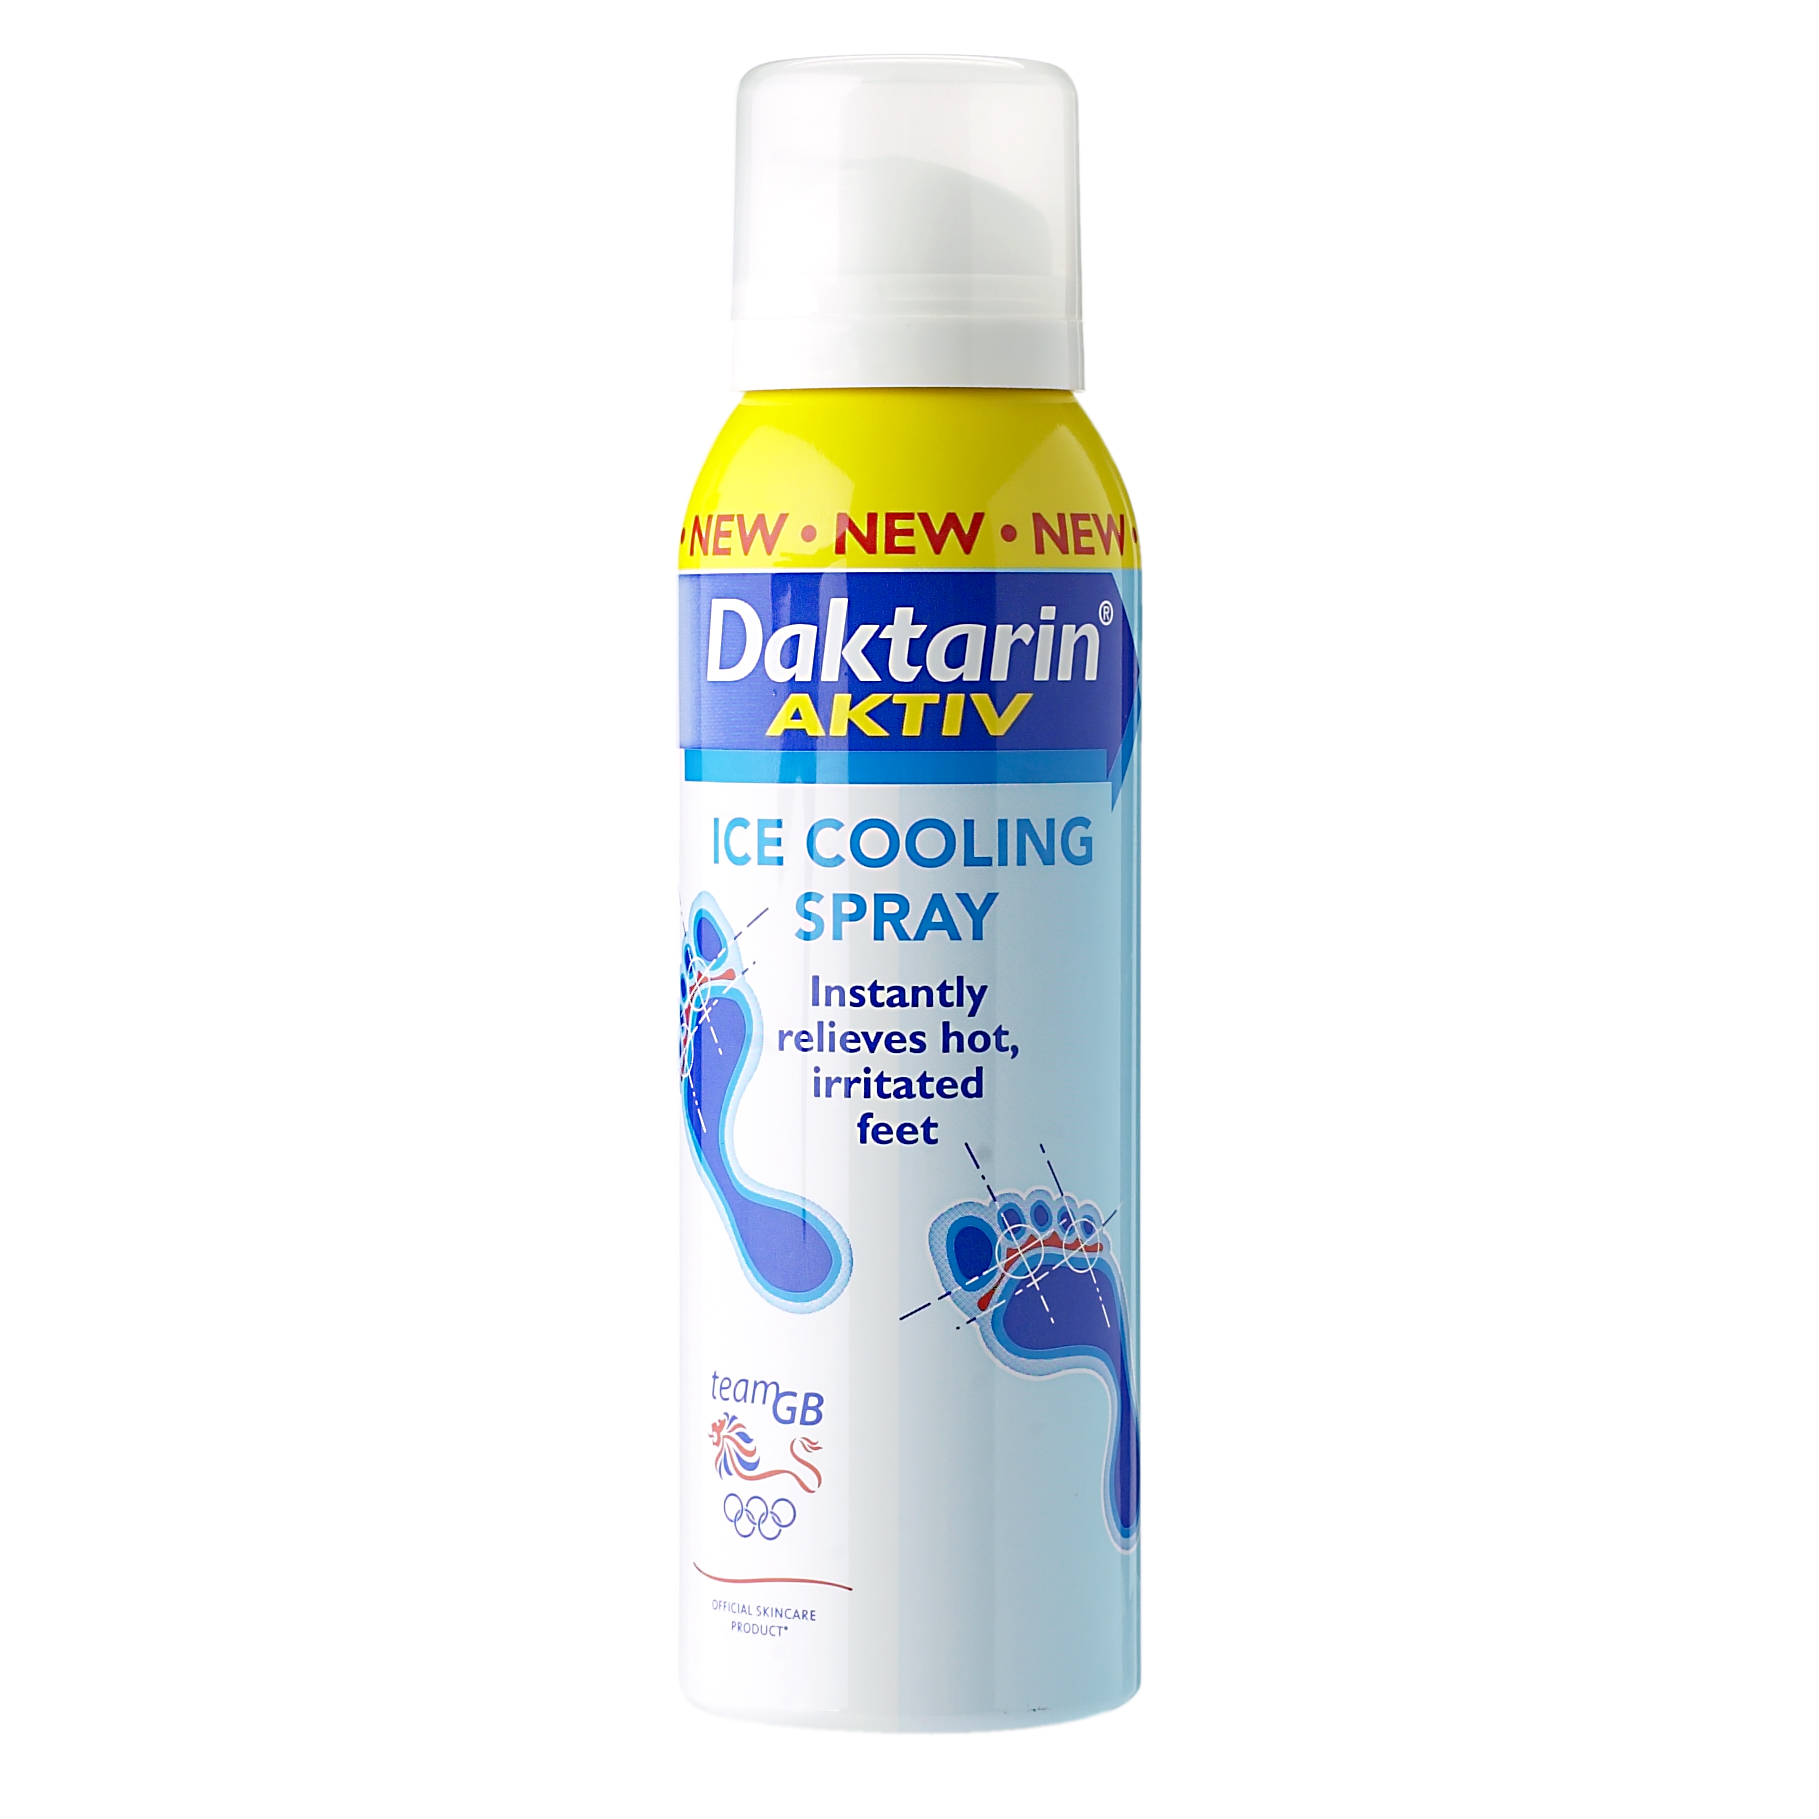 Daktarin Aktiv Ice Cooling Spray provides instant icy cool relief for hot, irritated feet. Triple ac